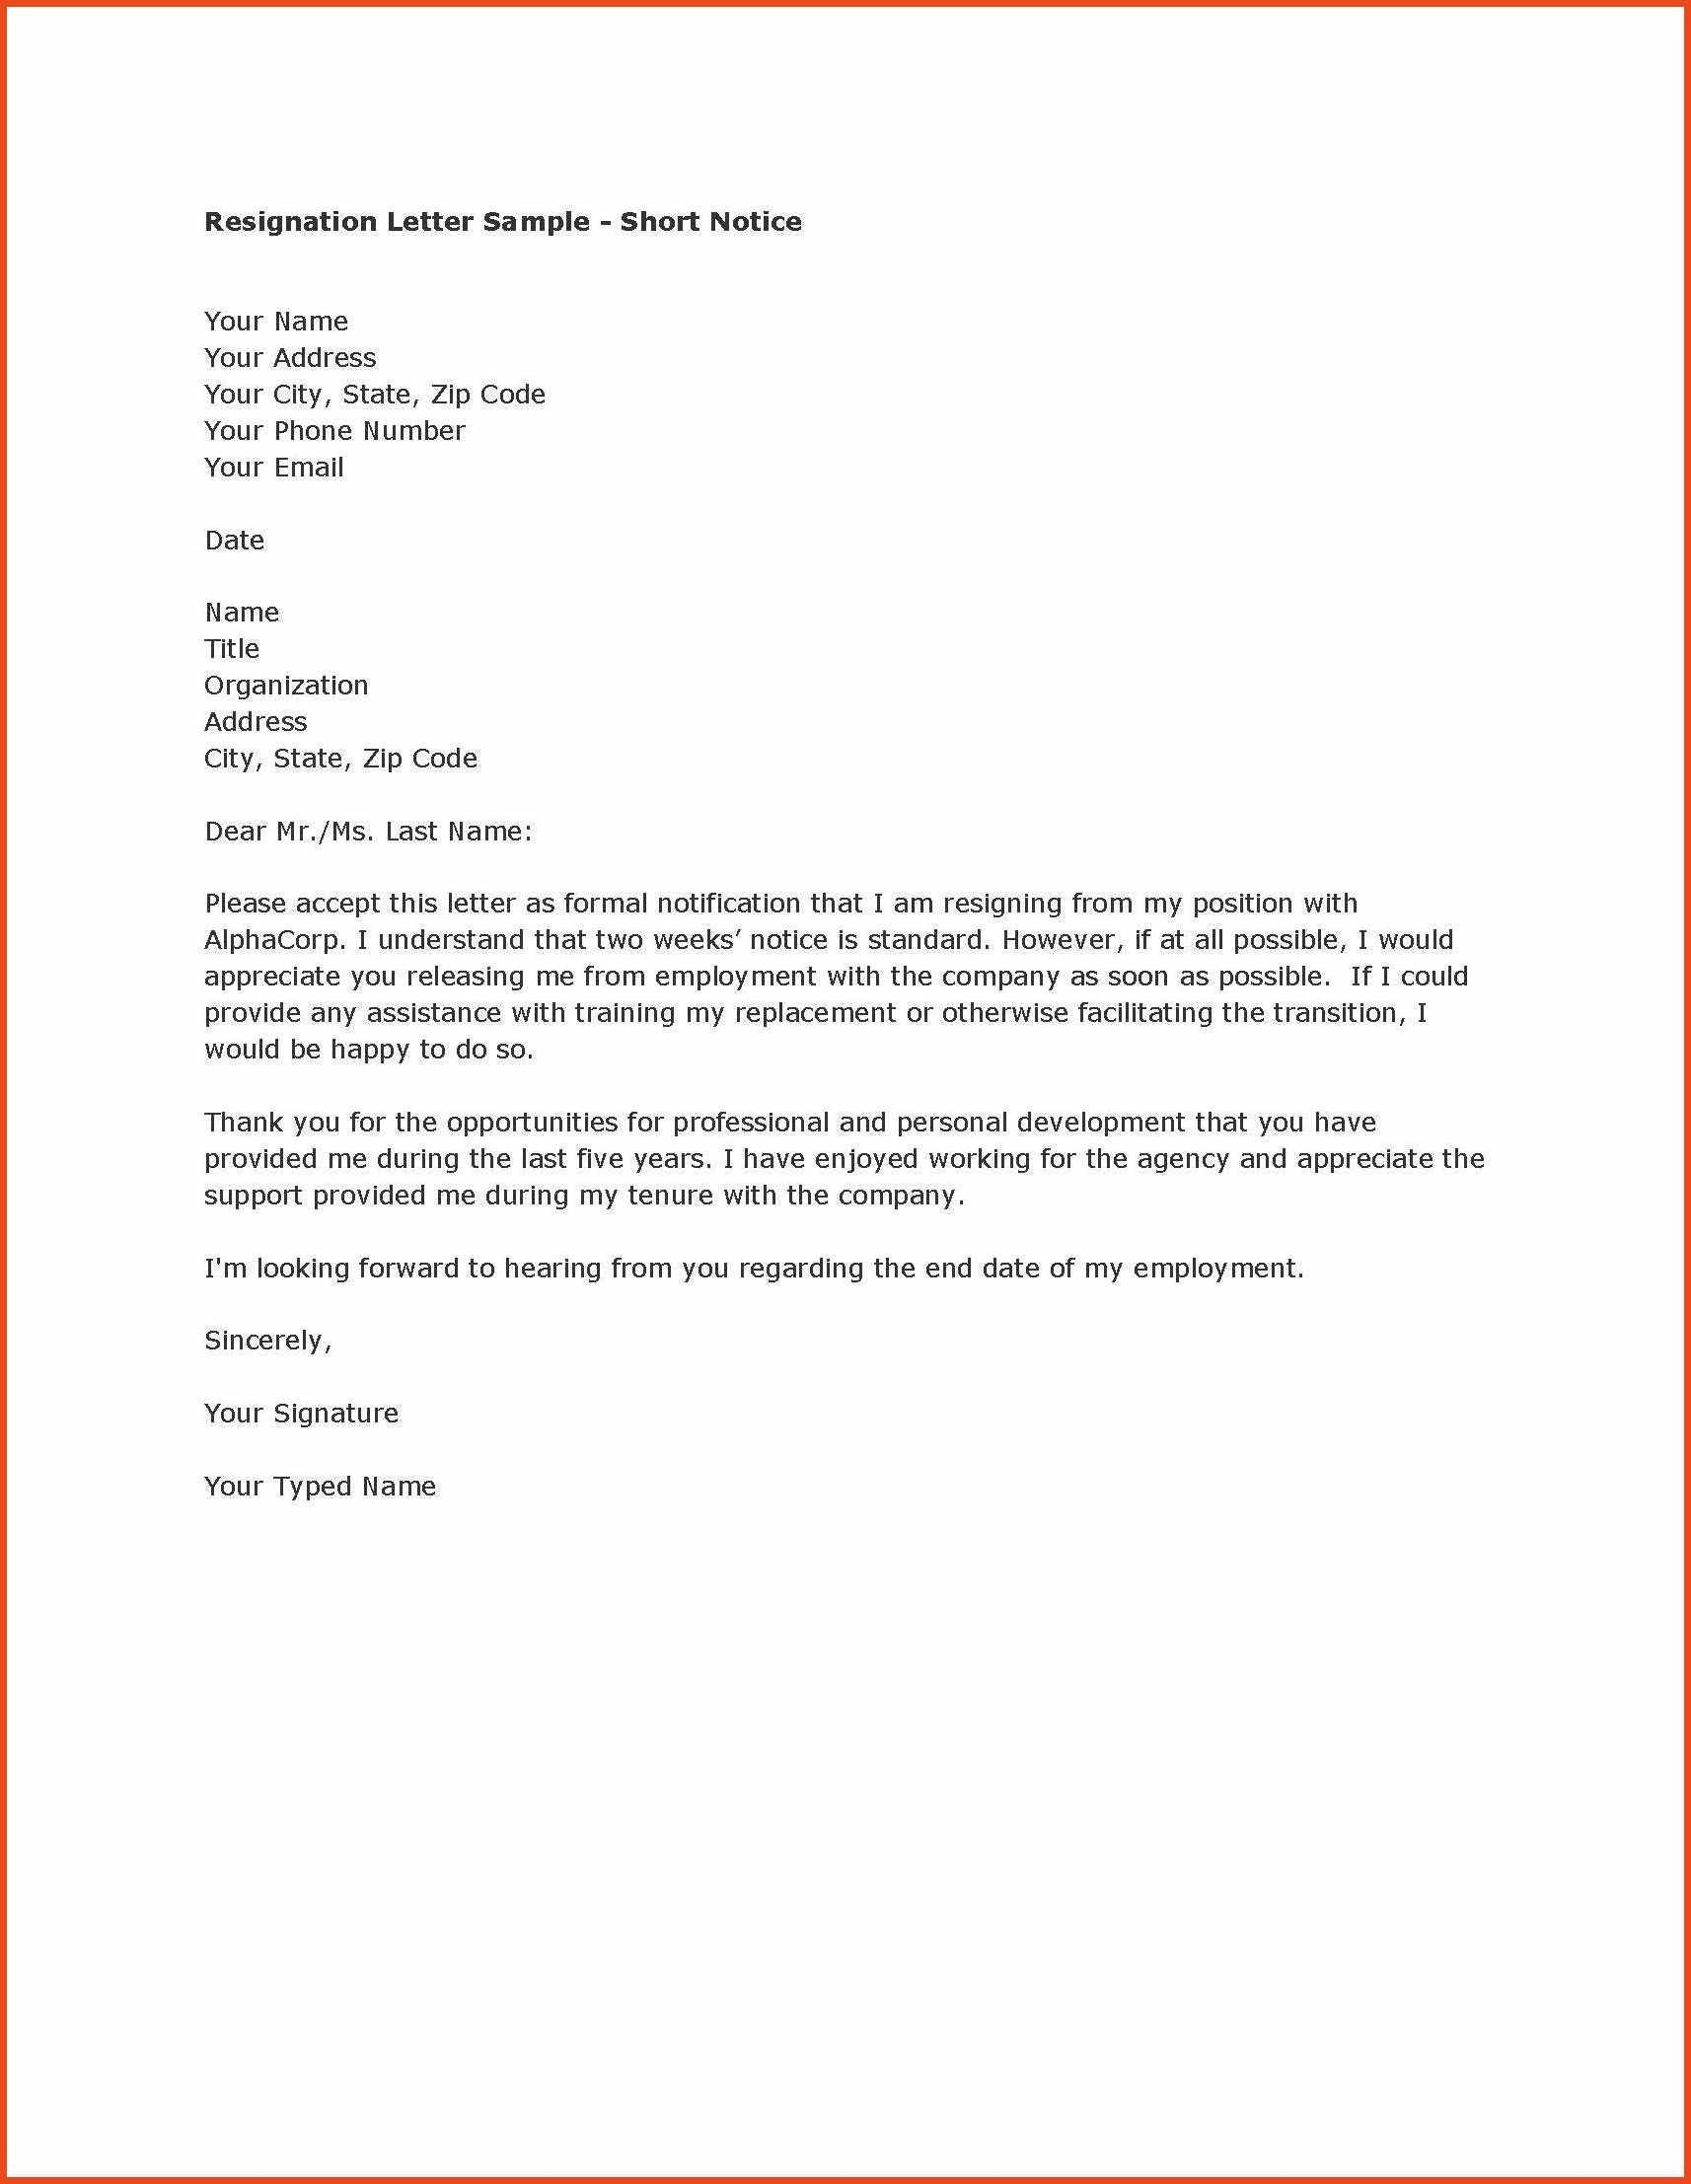 basic-resignation-letter-template-examples-letter-template-collection